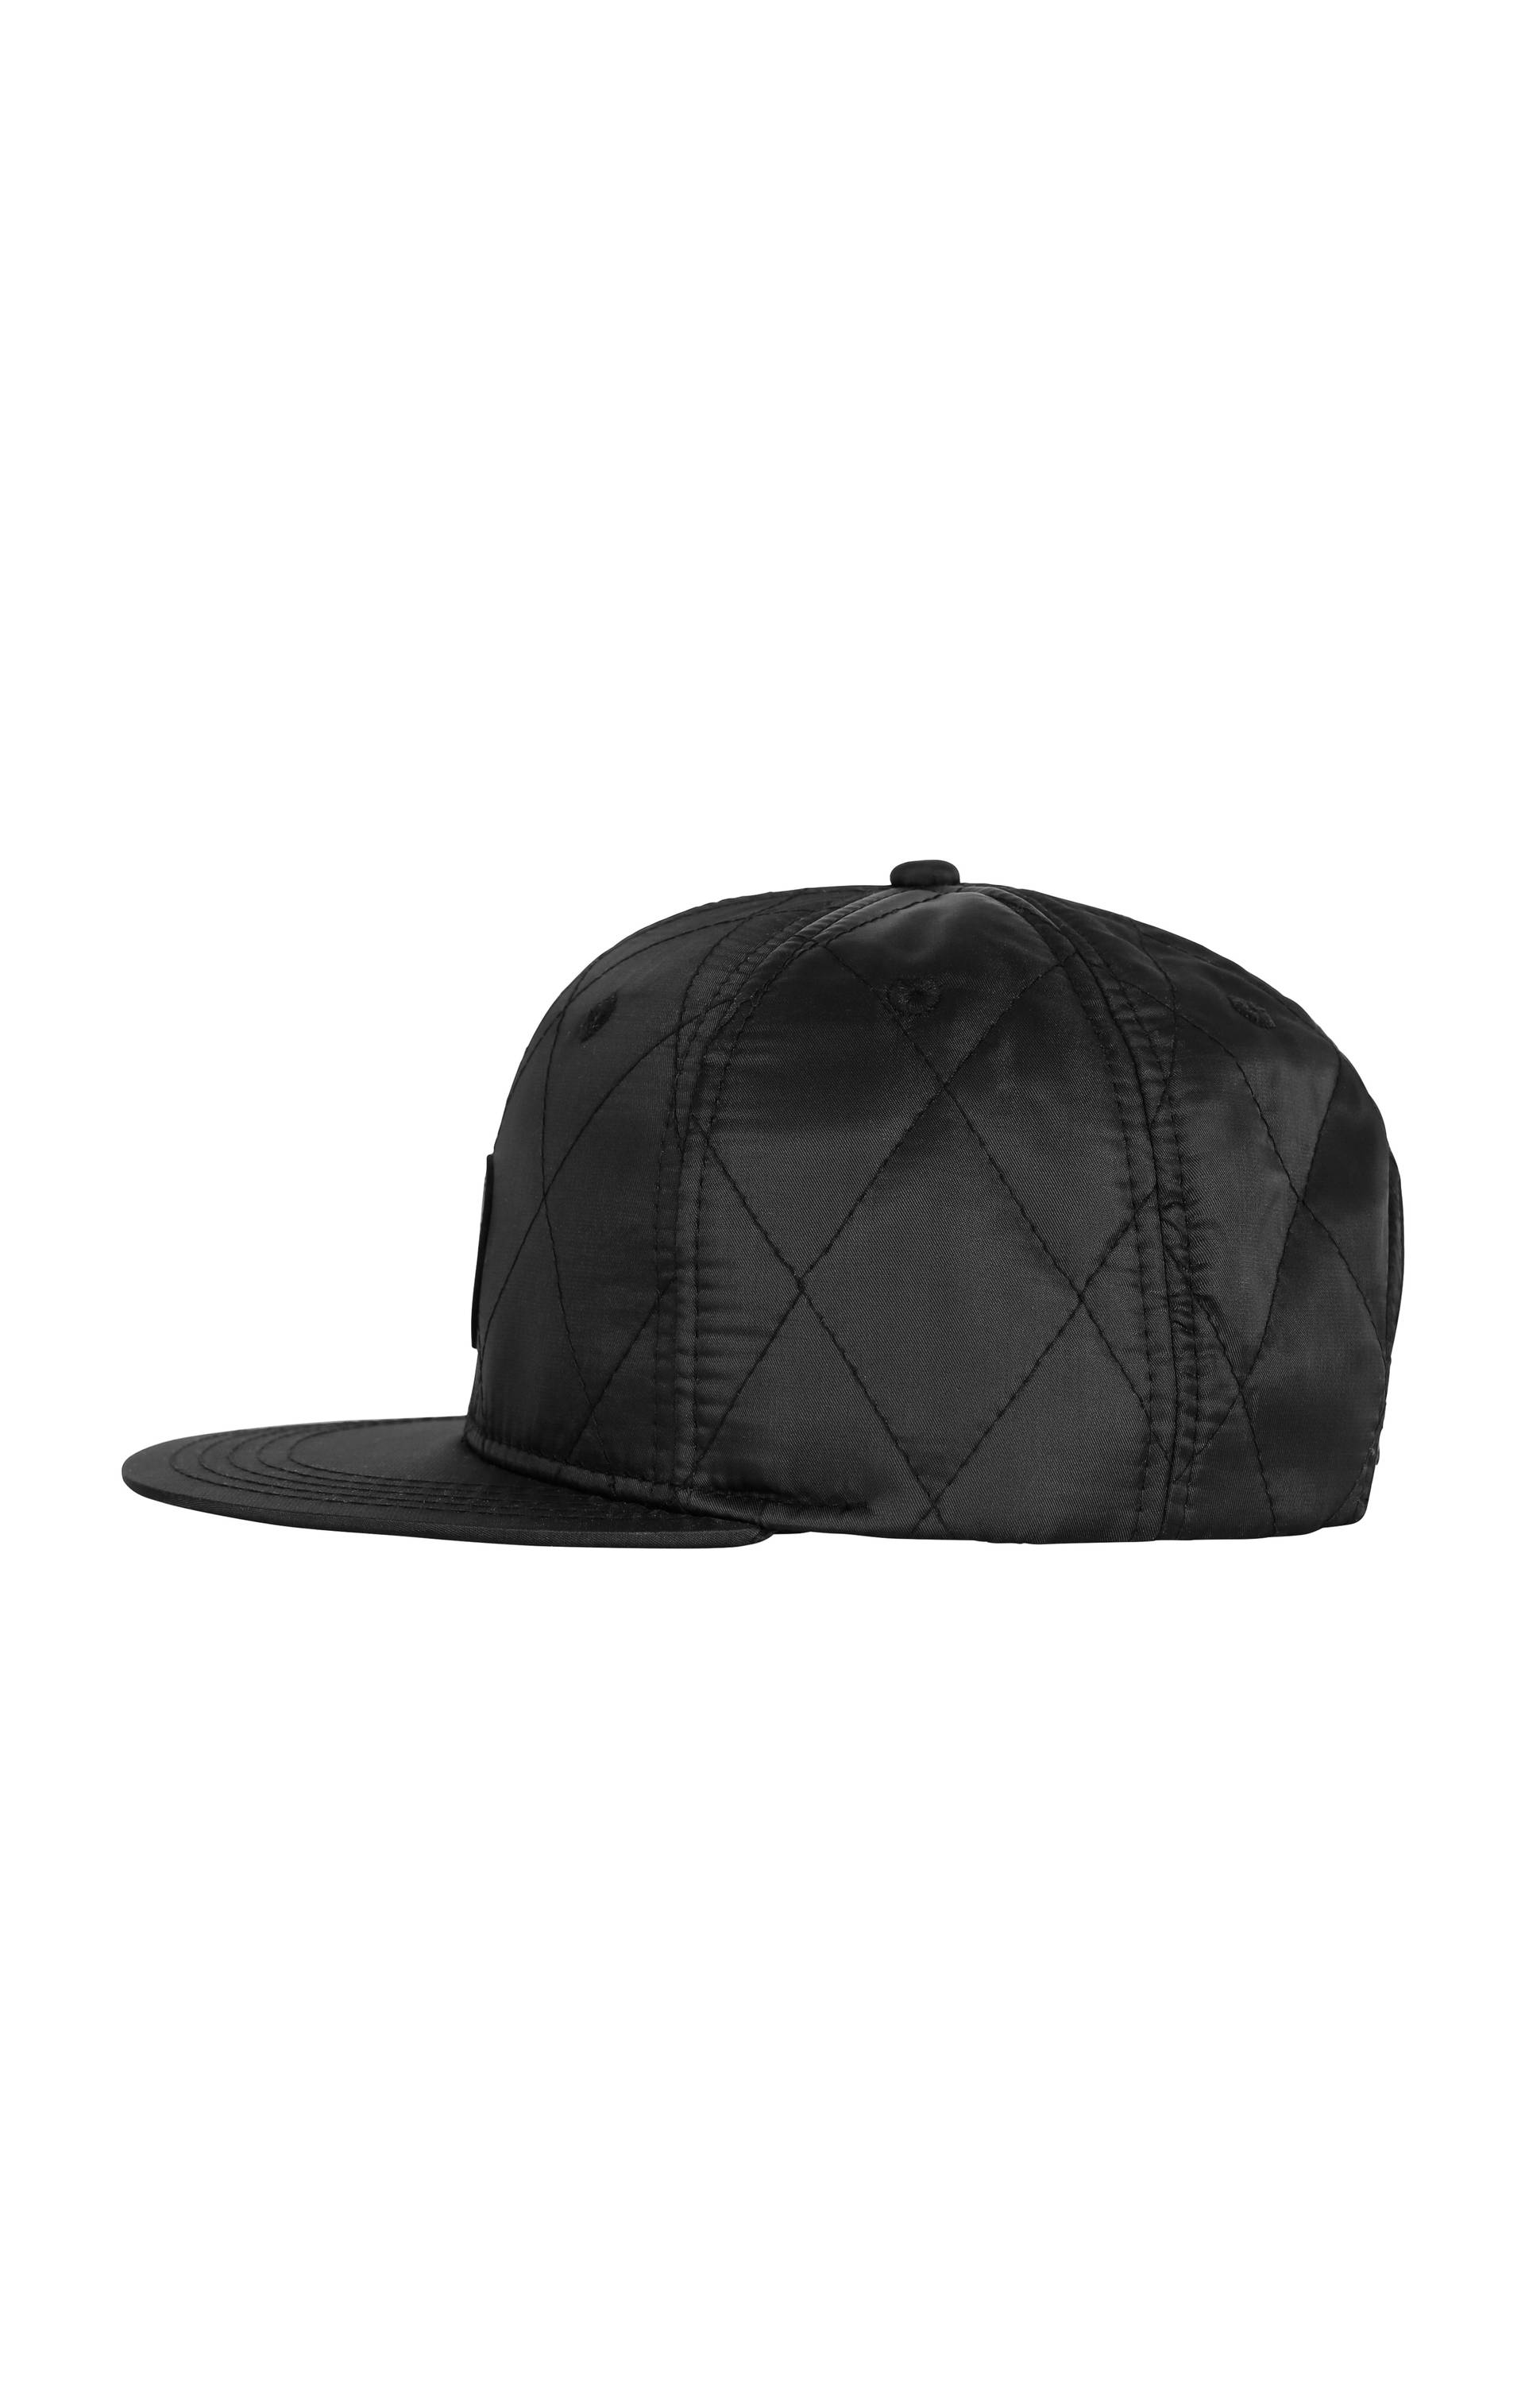 Onepiece Quilted Cap Snapback Black - 2